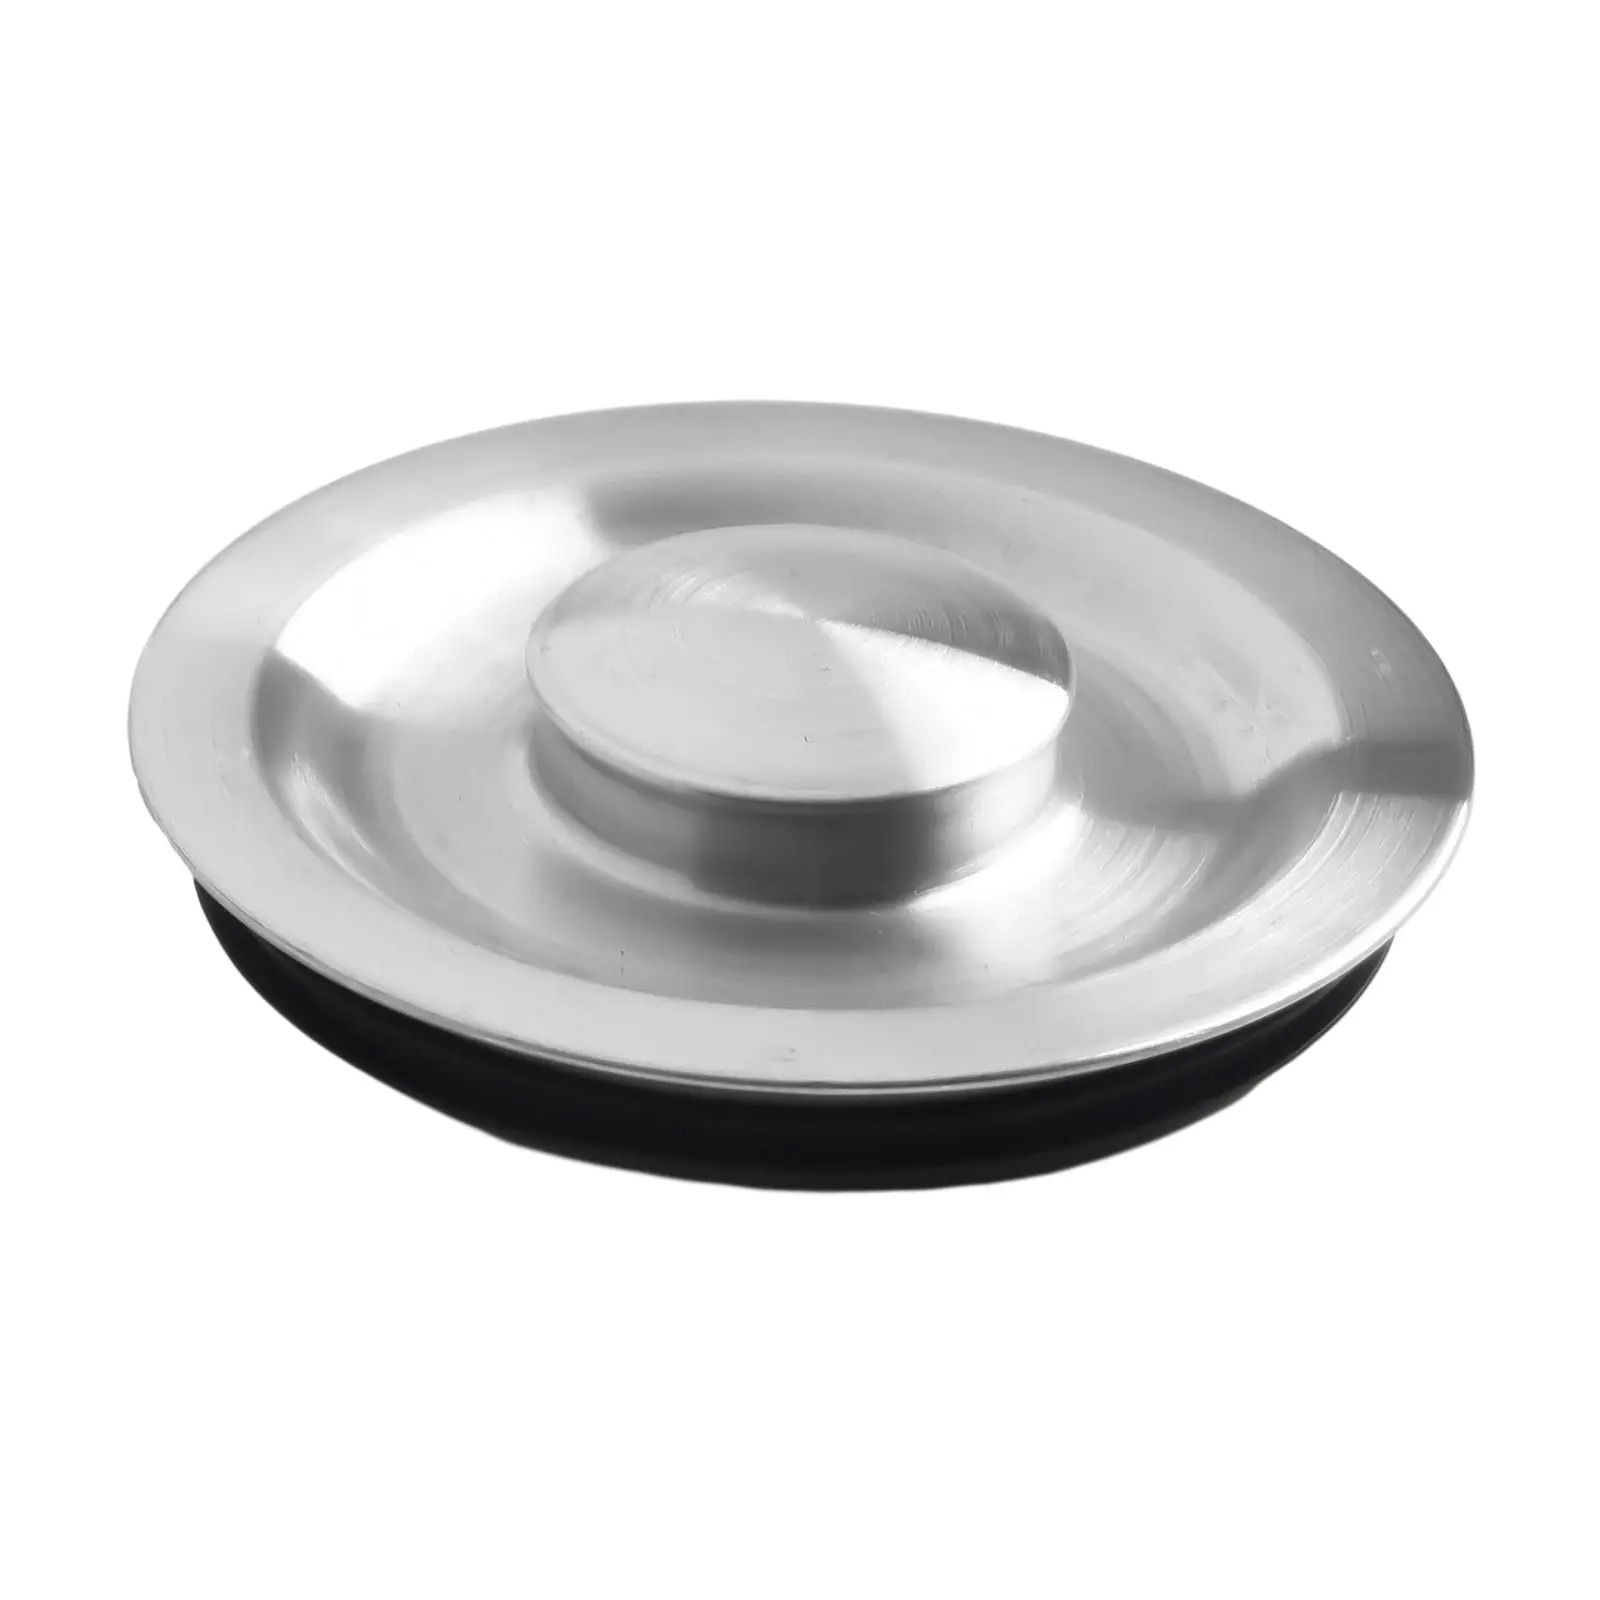 

Stainless Steel Materials Sink Drain Stopper Universal Kitchen Accessory For Bathtub Stoppers 60 80 Characters